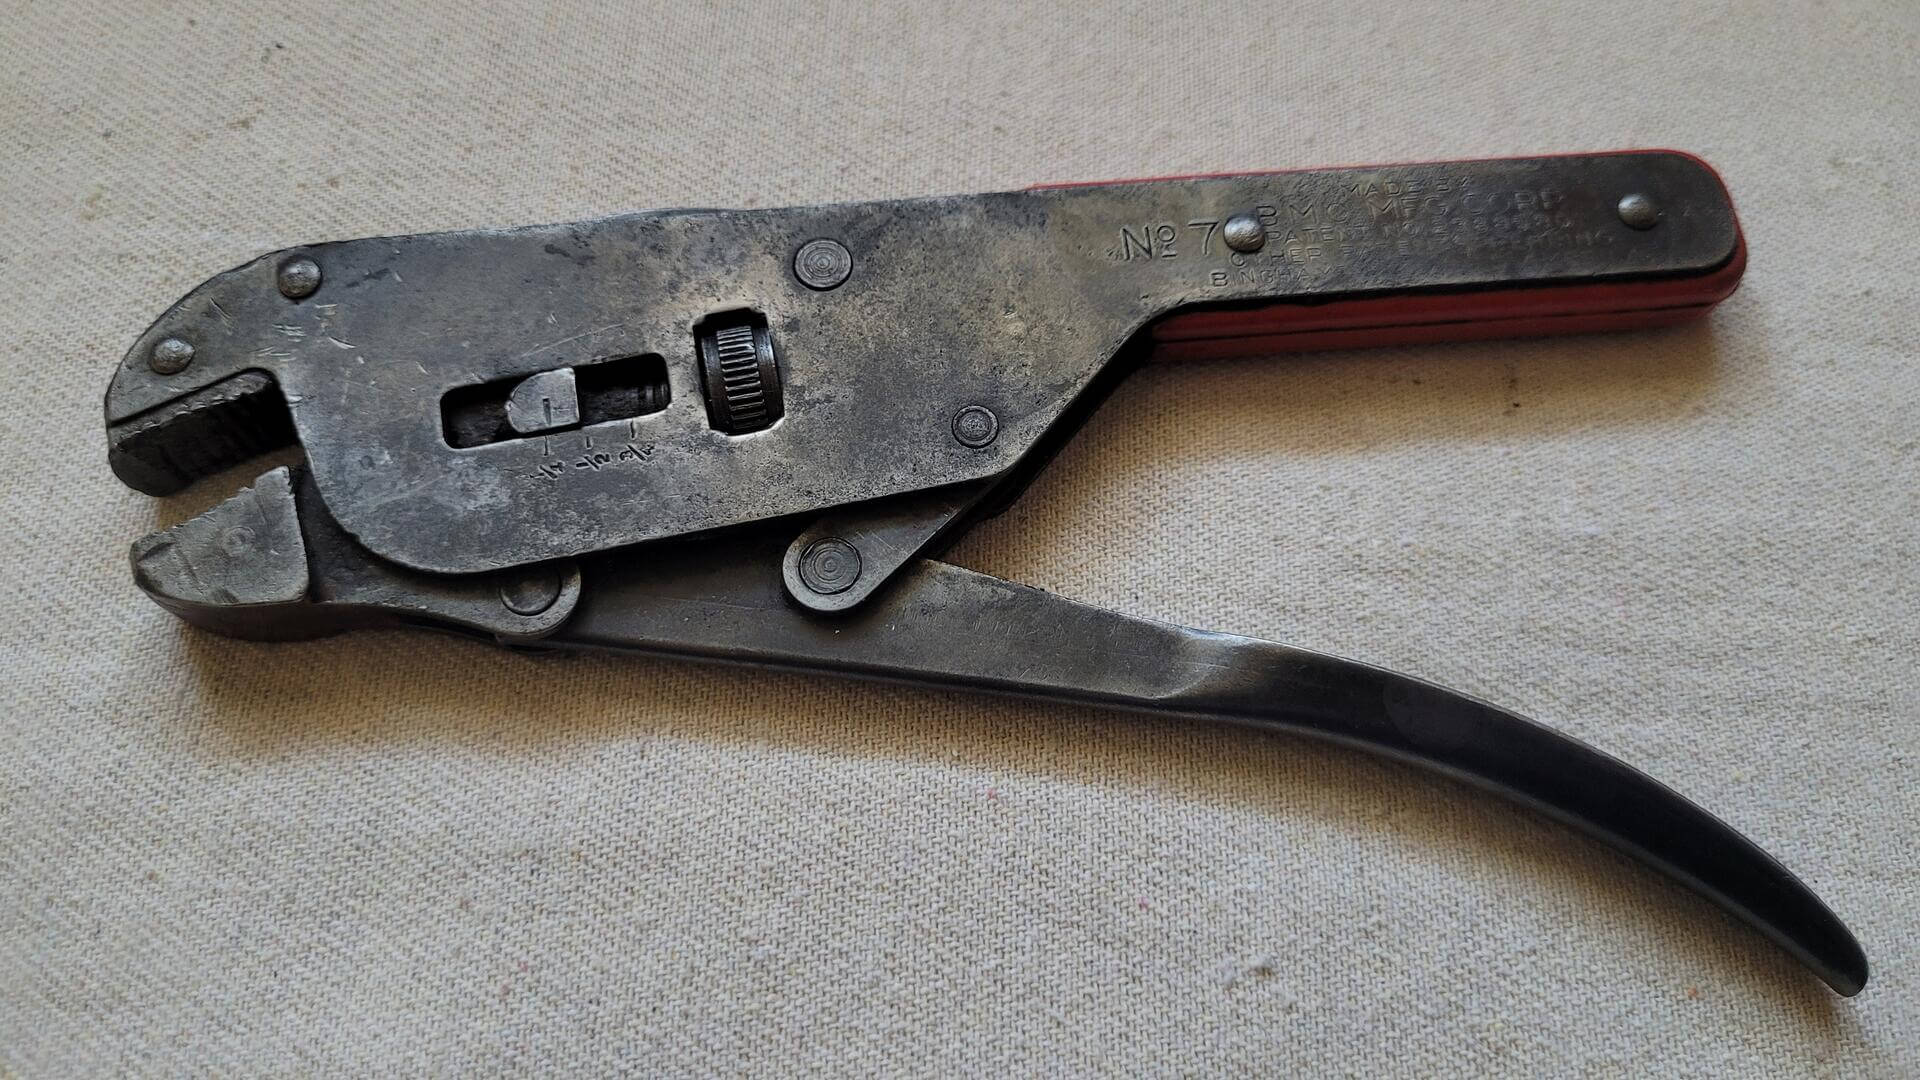 Rare antique No. 7 locking jaw adjustable wrench pliers Patent No 2388580 by Botnick Motor Corporation from Binghamton, NY. Vintage made in USA collectible hand tool marketed as "It's a wrench and 5 other tools"